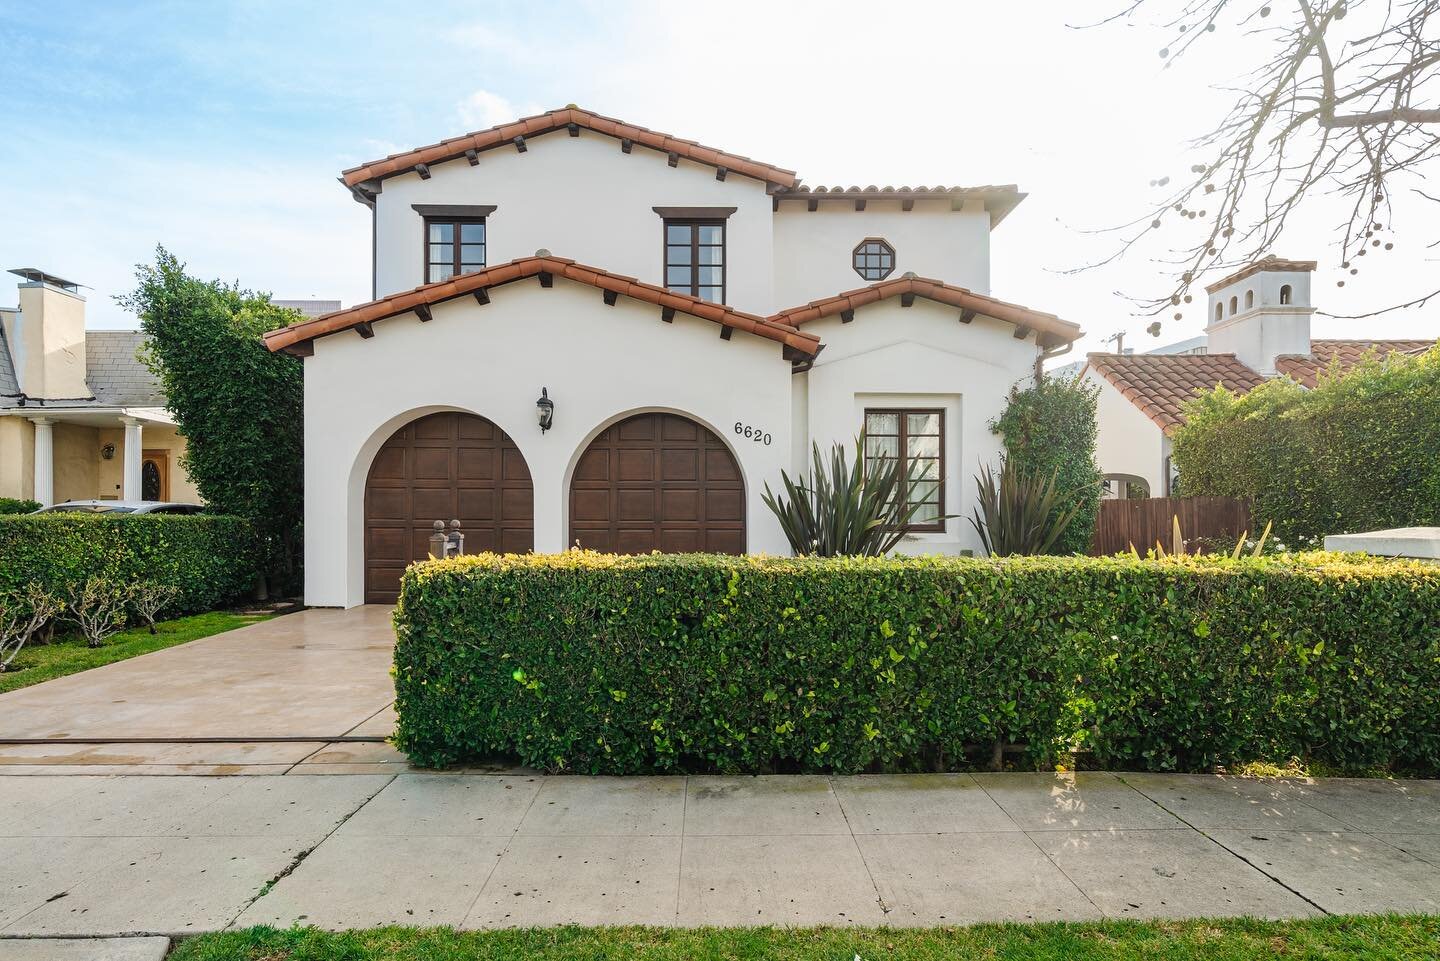 JUST LISTED FOR LEASE |📍Lindenhurst Ave, Los Angeles 90048 | 4 bedroom, 4 bath luxury Spanish home in Beverly Grove! Soaring beamed ceilings, dark wood floors, and French doors that lead out to a sparkling pool and spa! High-end finishes throughout!